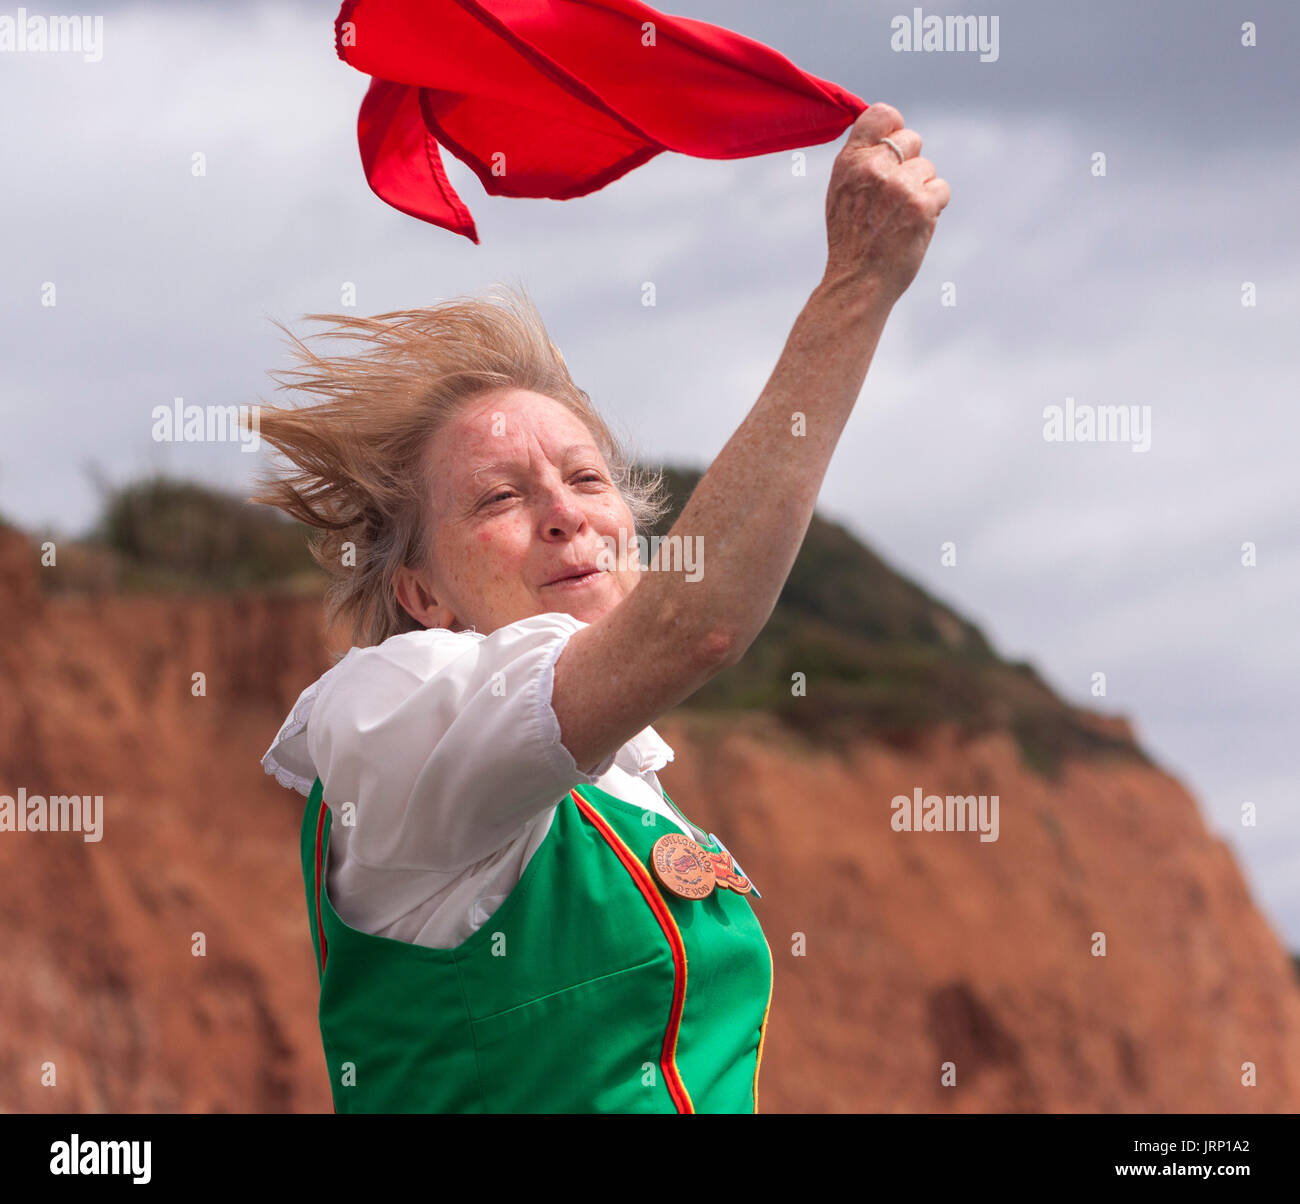 Sidmouth, UK. 6th August, 2017. Traditional dance displays on Sidmouth seafront during the town's annual folk week. Sidmouth Folk Week Festival continues until the 11th August. Credit: Photo Central/Alamy Live News Stock Photo